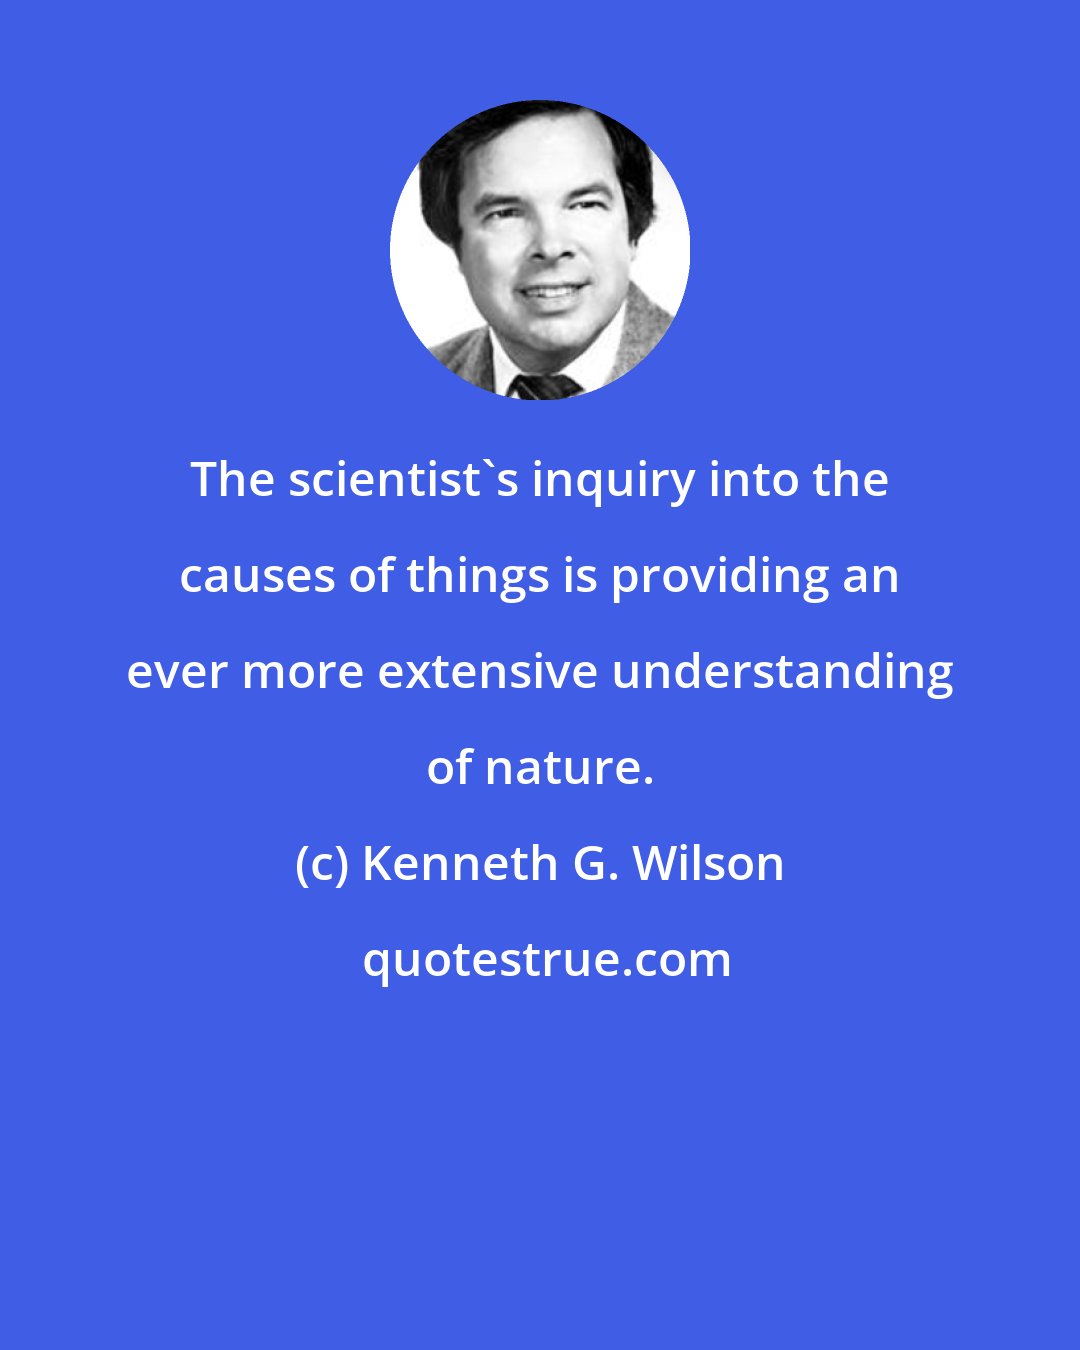 Kenneth G. Wilson: The scientist's inquiry into the causes of things is providing an ever more extensive understanding of nature.